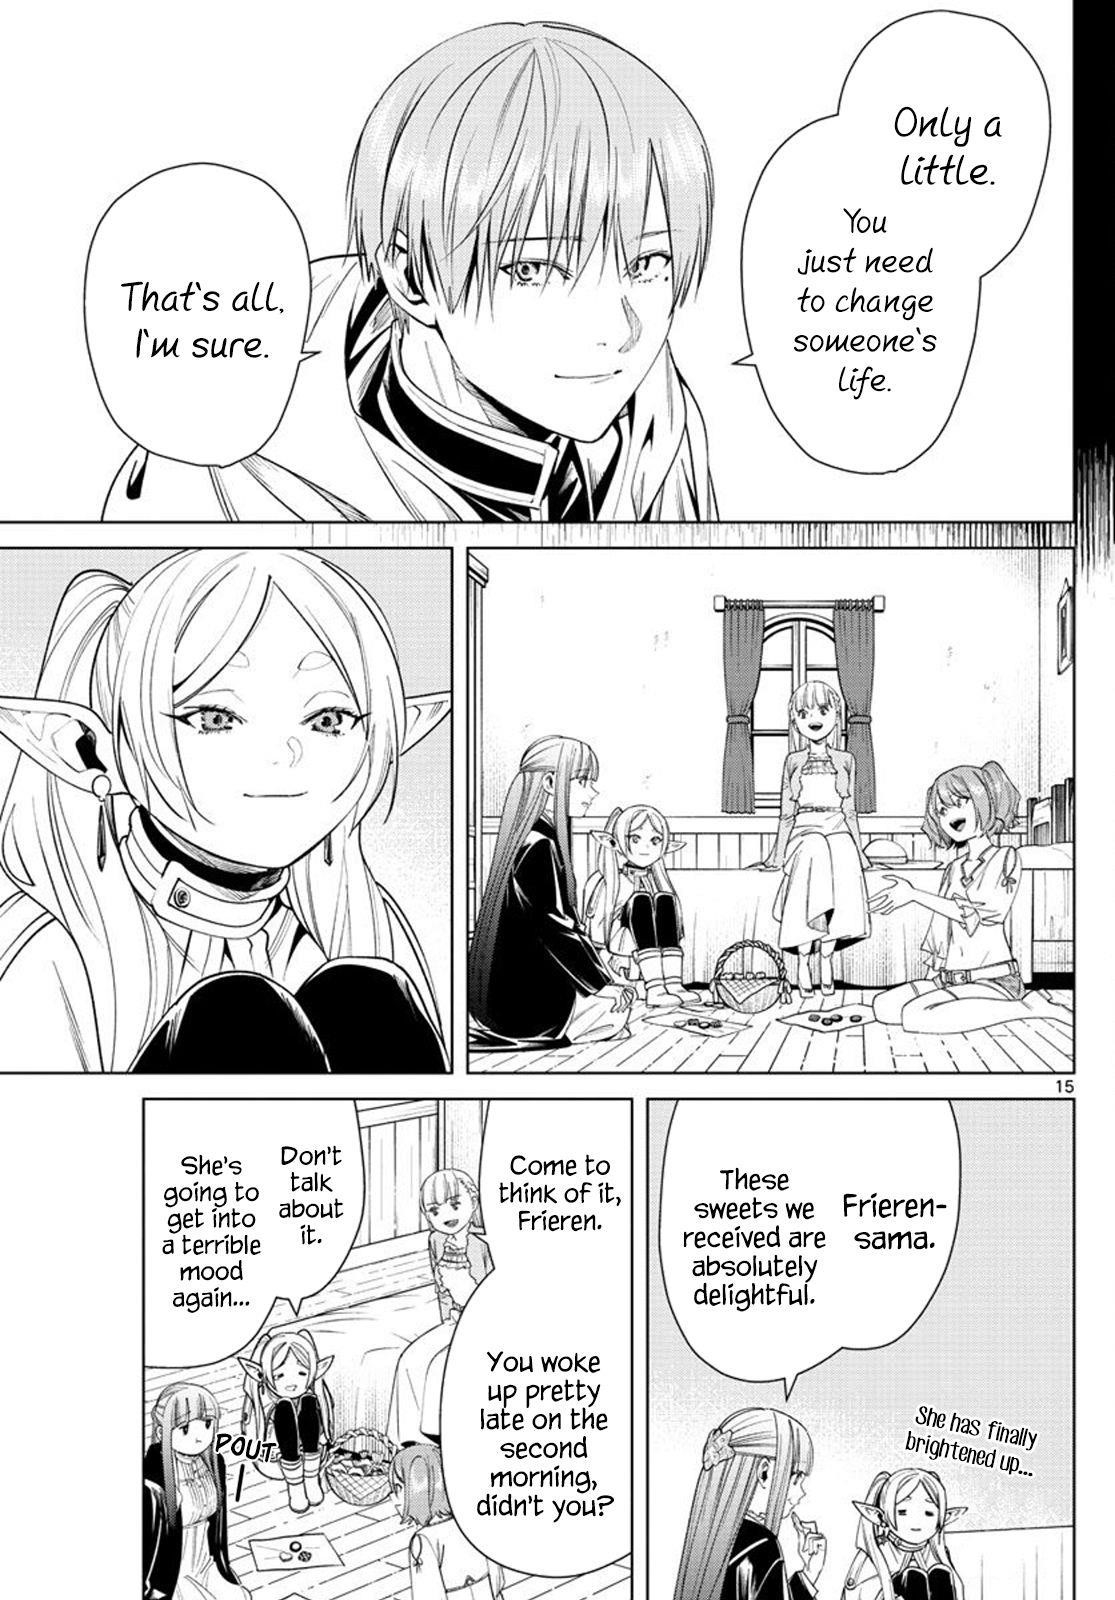 Read Manga Frieren at the Funeral - Chapter 47